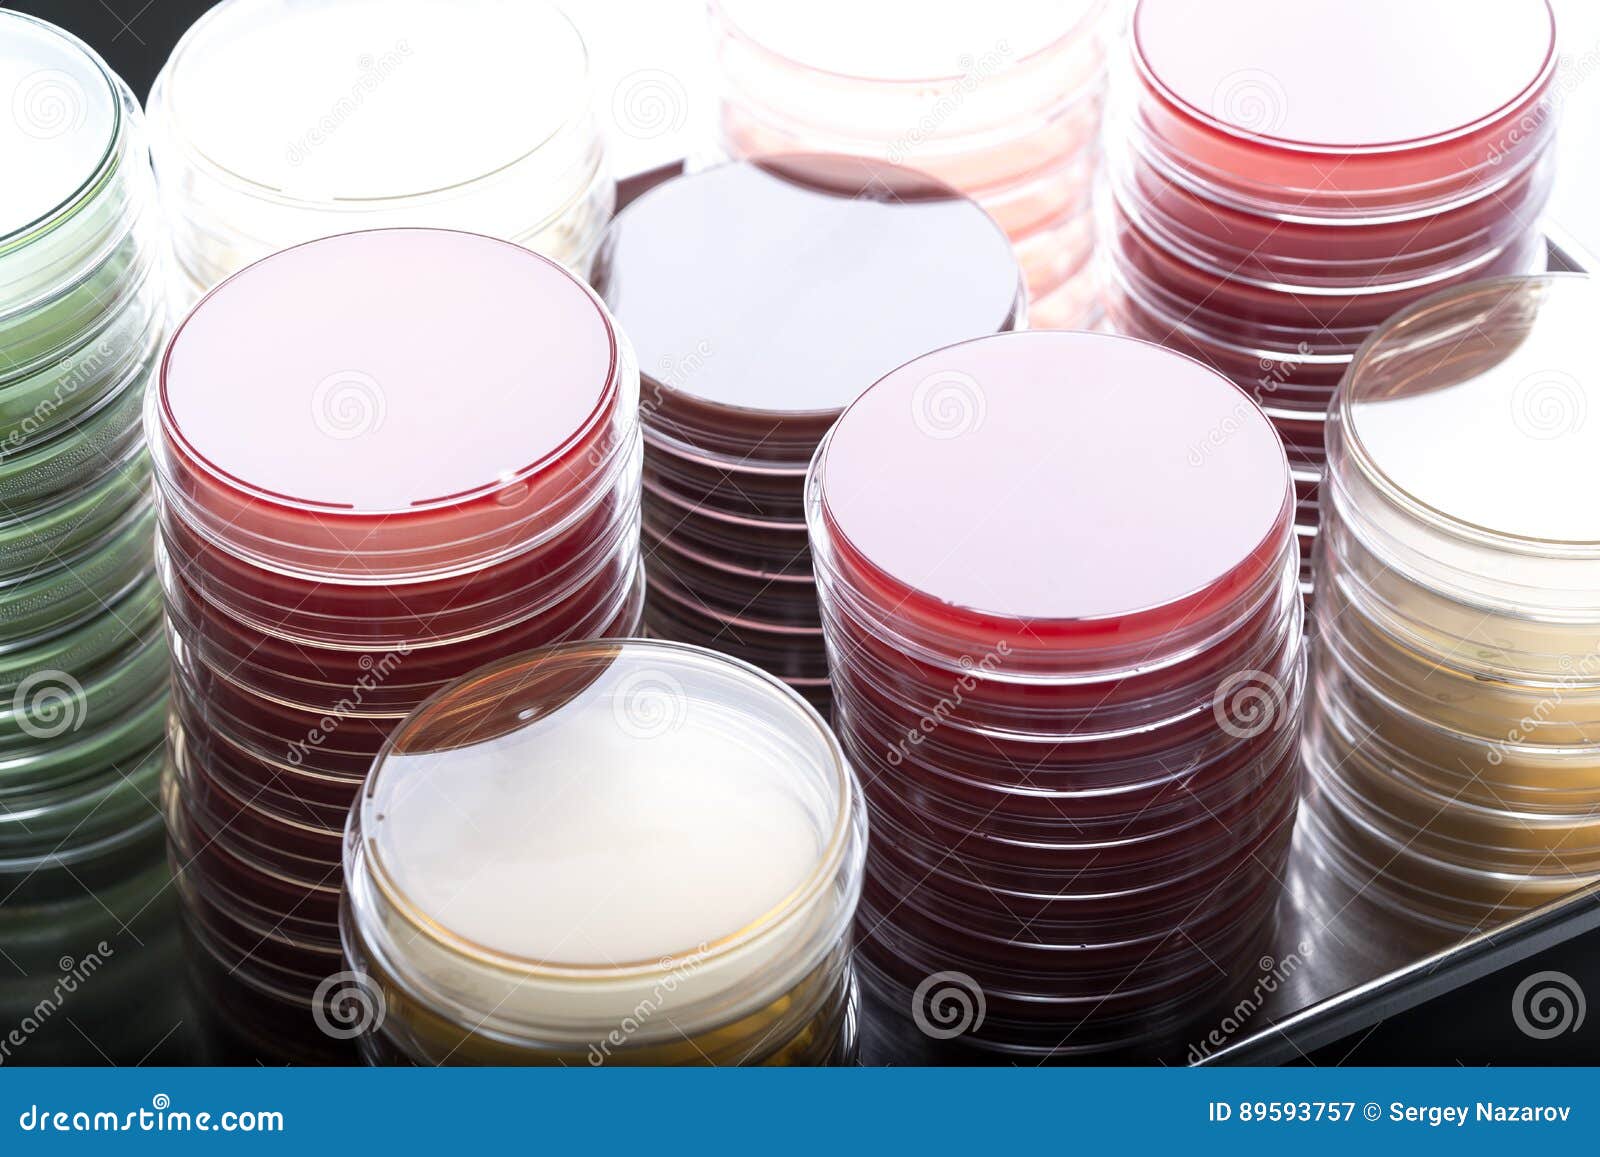 red and yellow petri dishes stacks in microbiology lab on the bacteriology laboratory background.